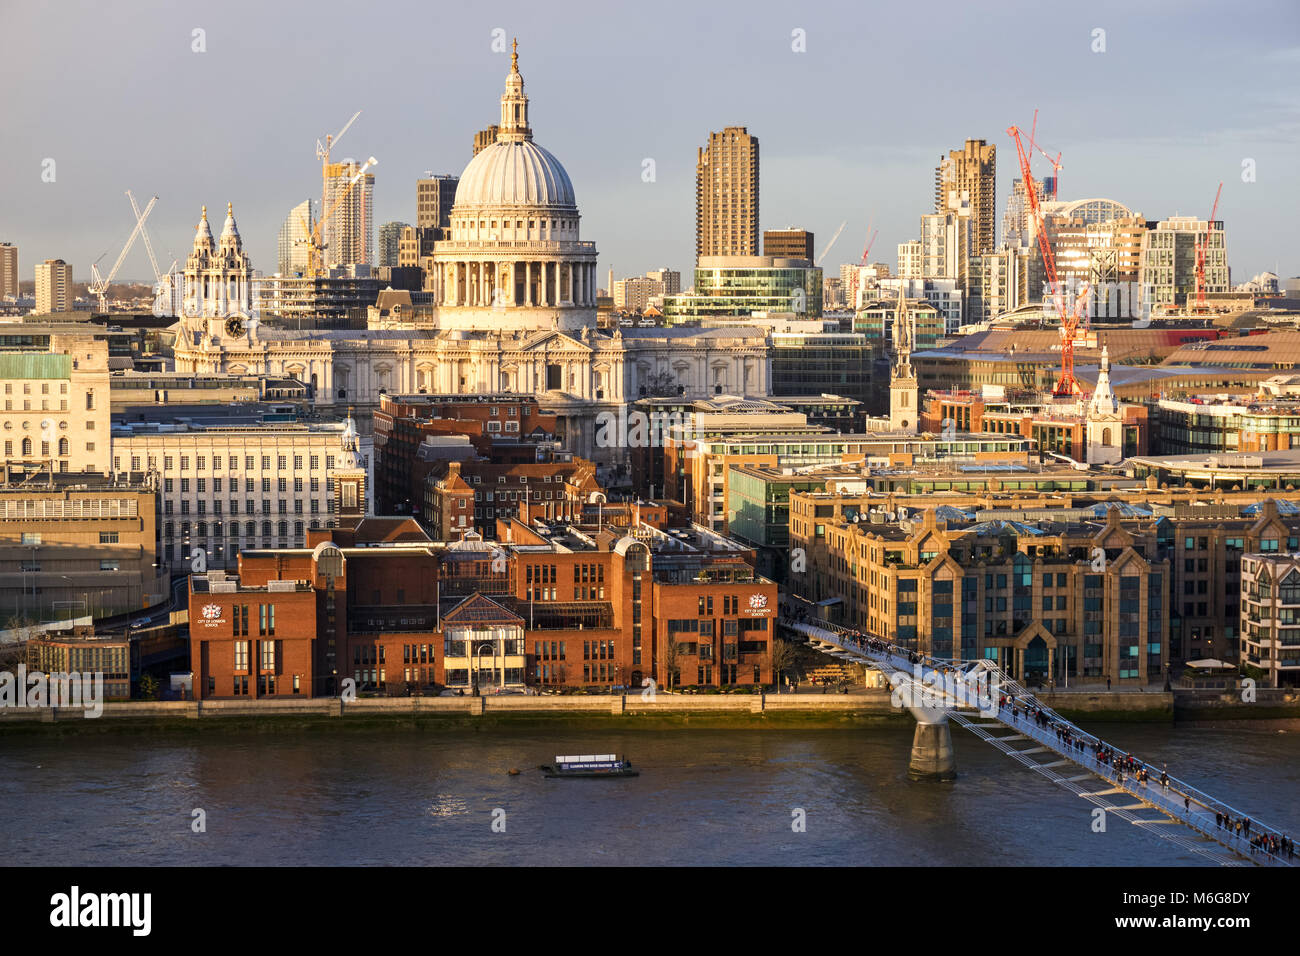 Panoramic view of St Paul's Cathedral and surrounding buildings, London England United Kingdom UK Stock Photo